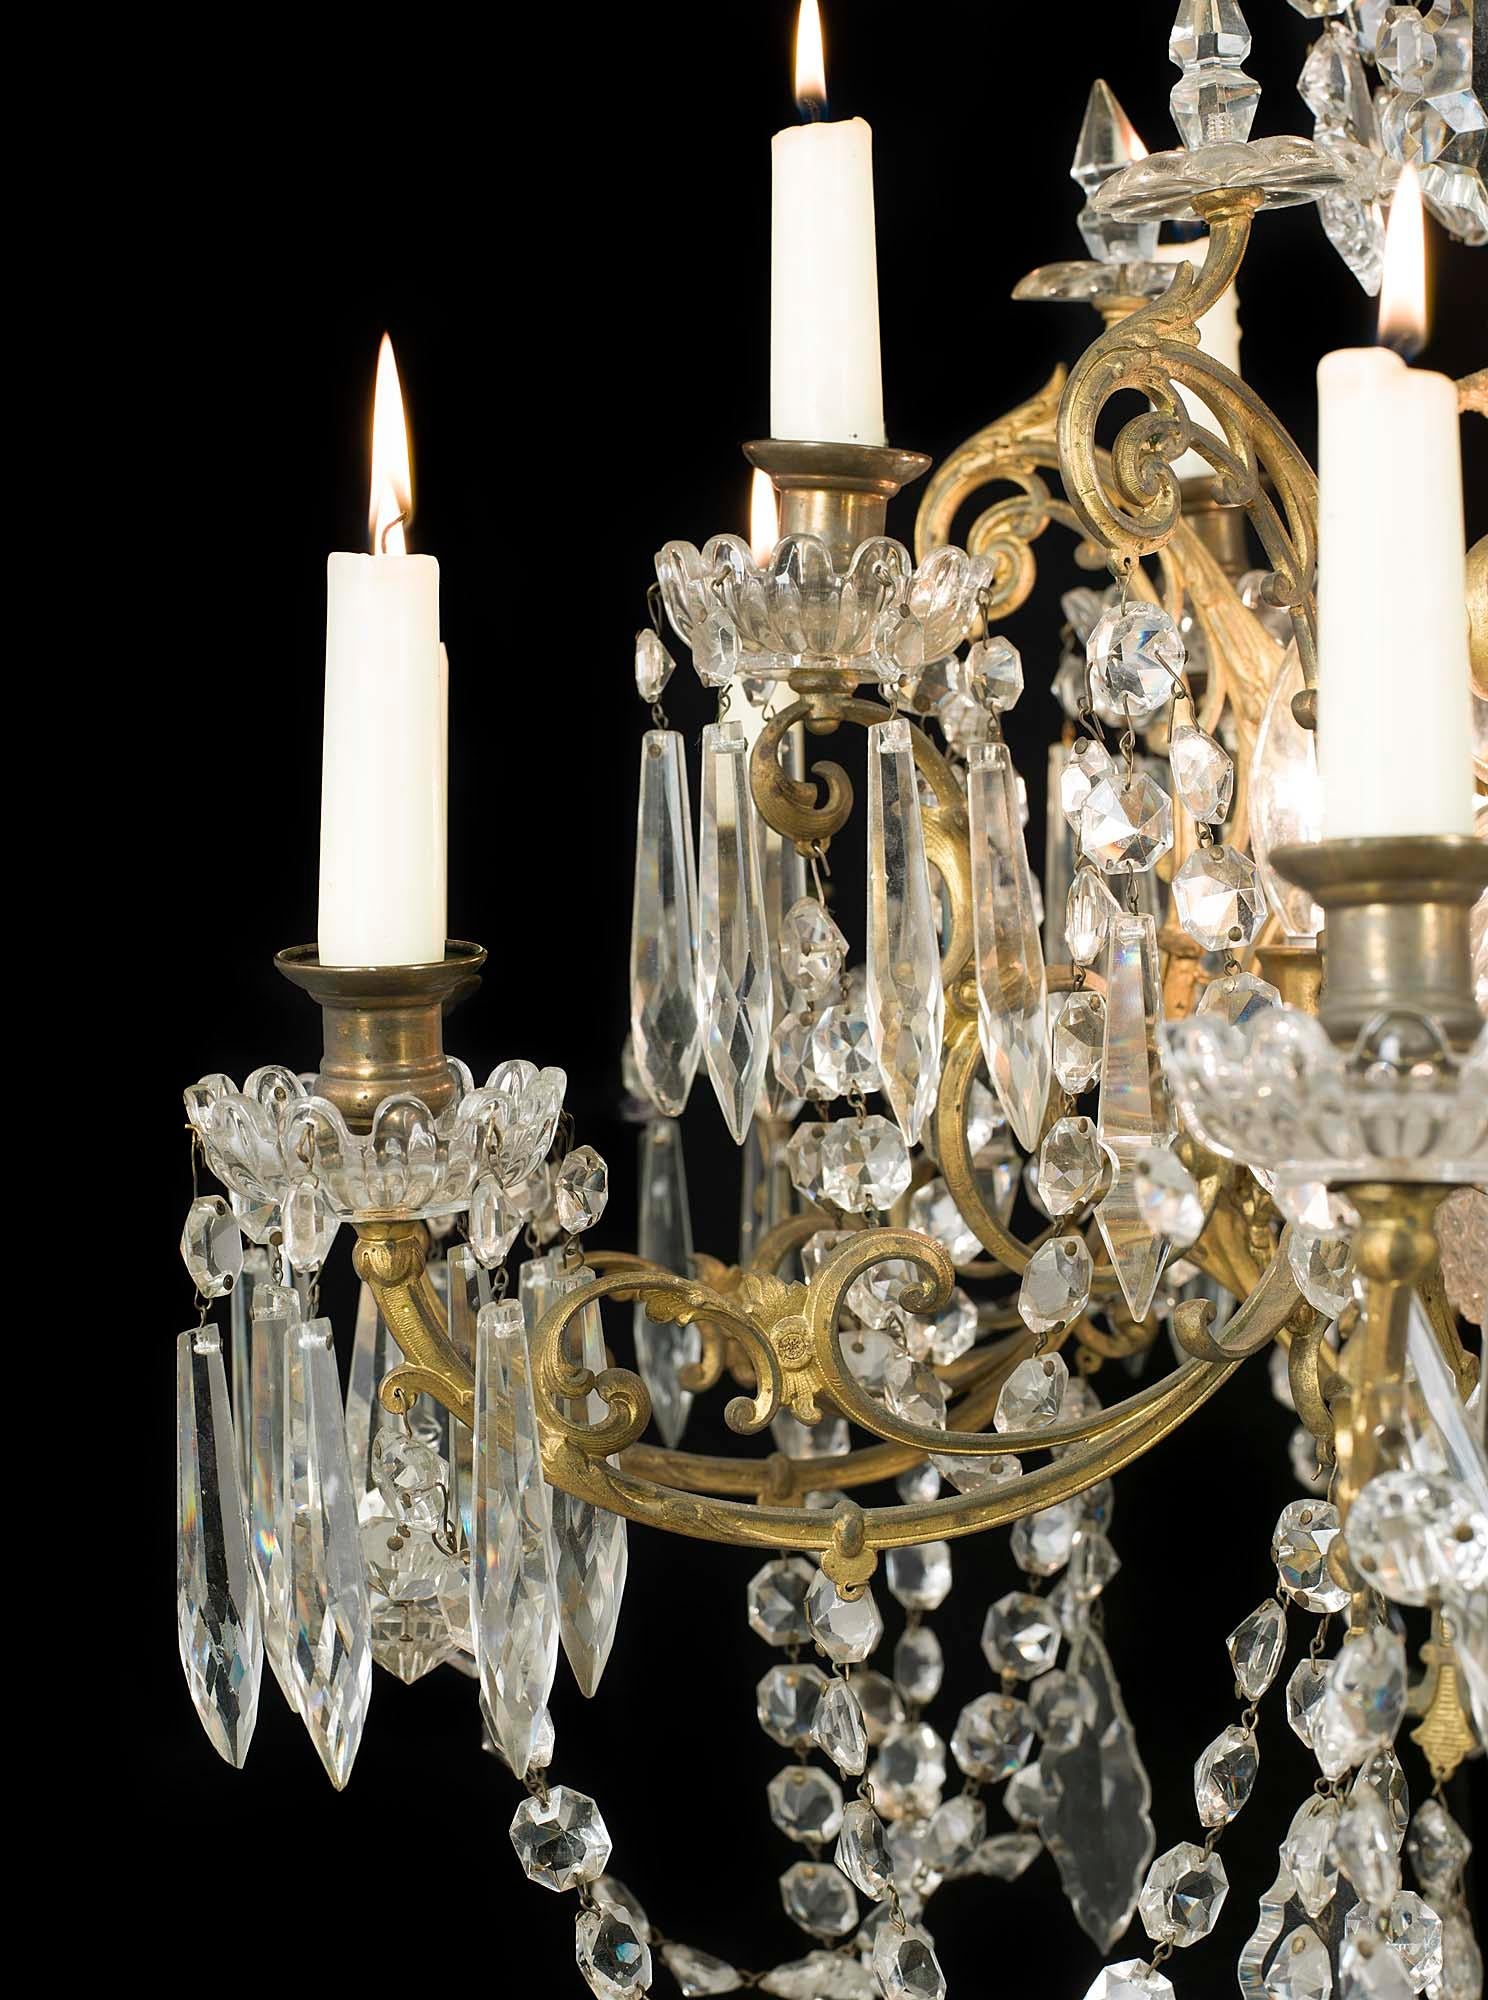 An early 20th century cut-glass and gilt metal neoclassical style fifteen candle chandelier in two tiers with glass drip trays and swags set on a gilt metal scrolling frame. The candles are not wired for electricity but there are five light bulbs